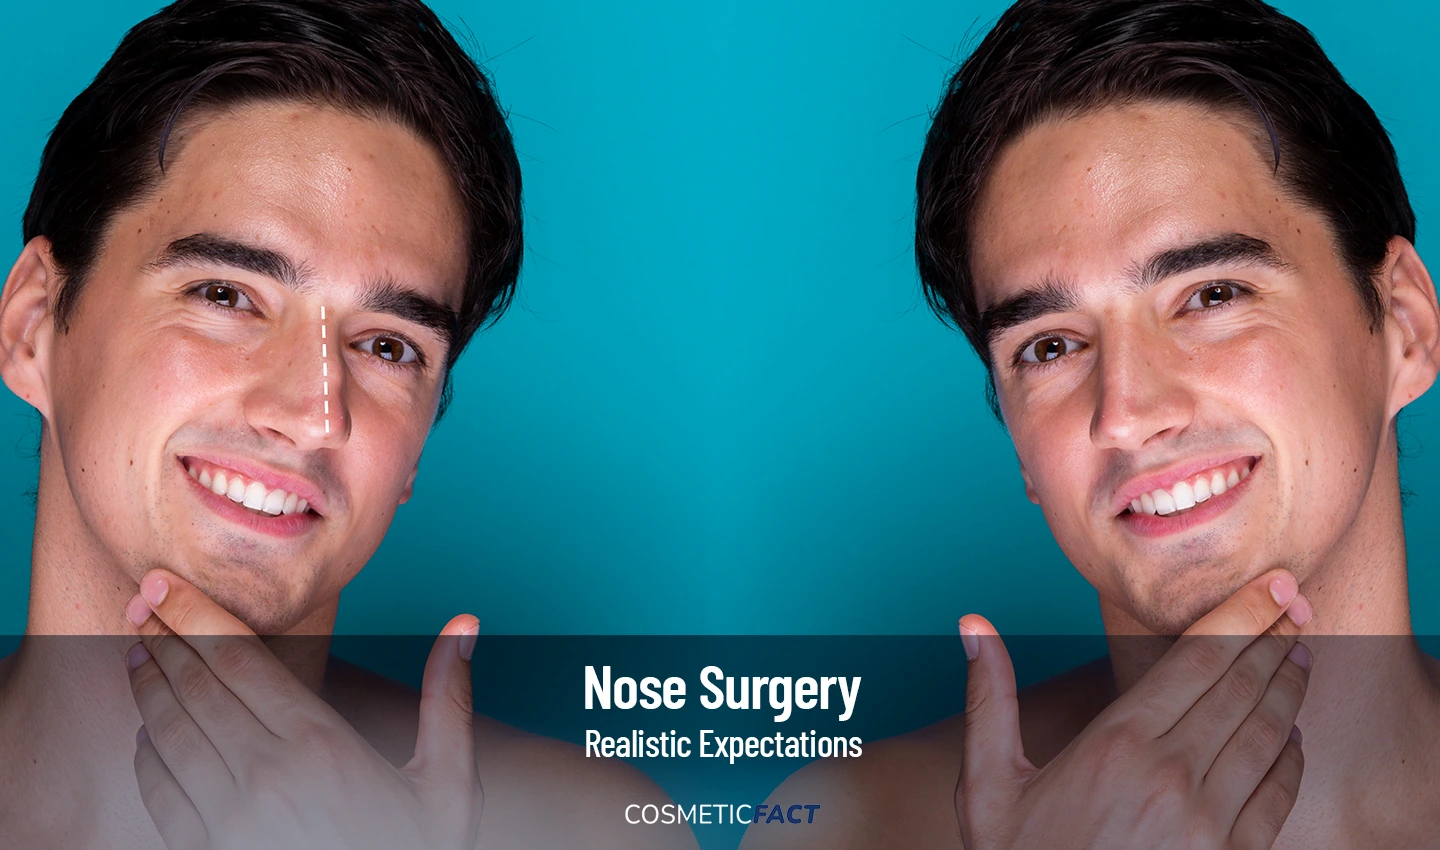 Rhinoplasty Expectations - A before and after photo showing a man with his old nose and new, enhanced nose after a rhinoplasty procedure